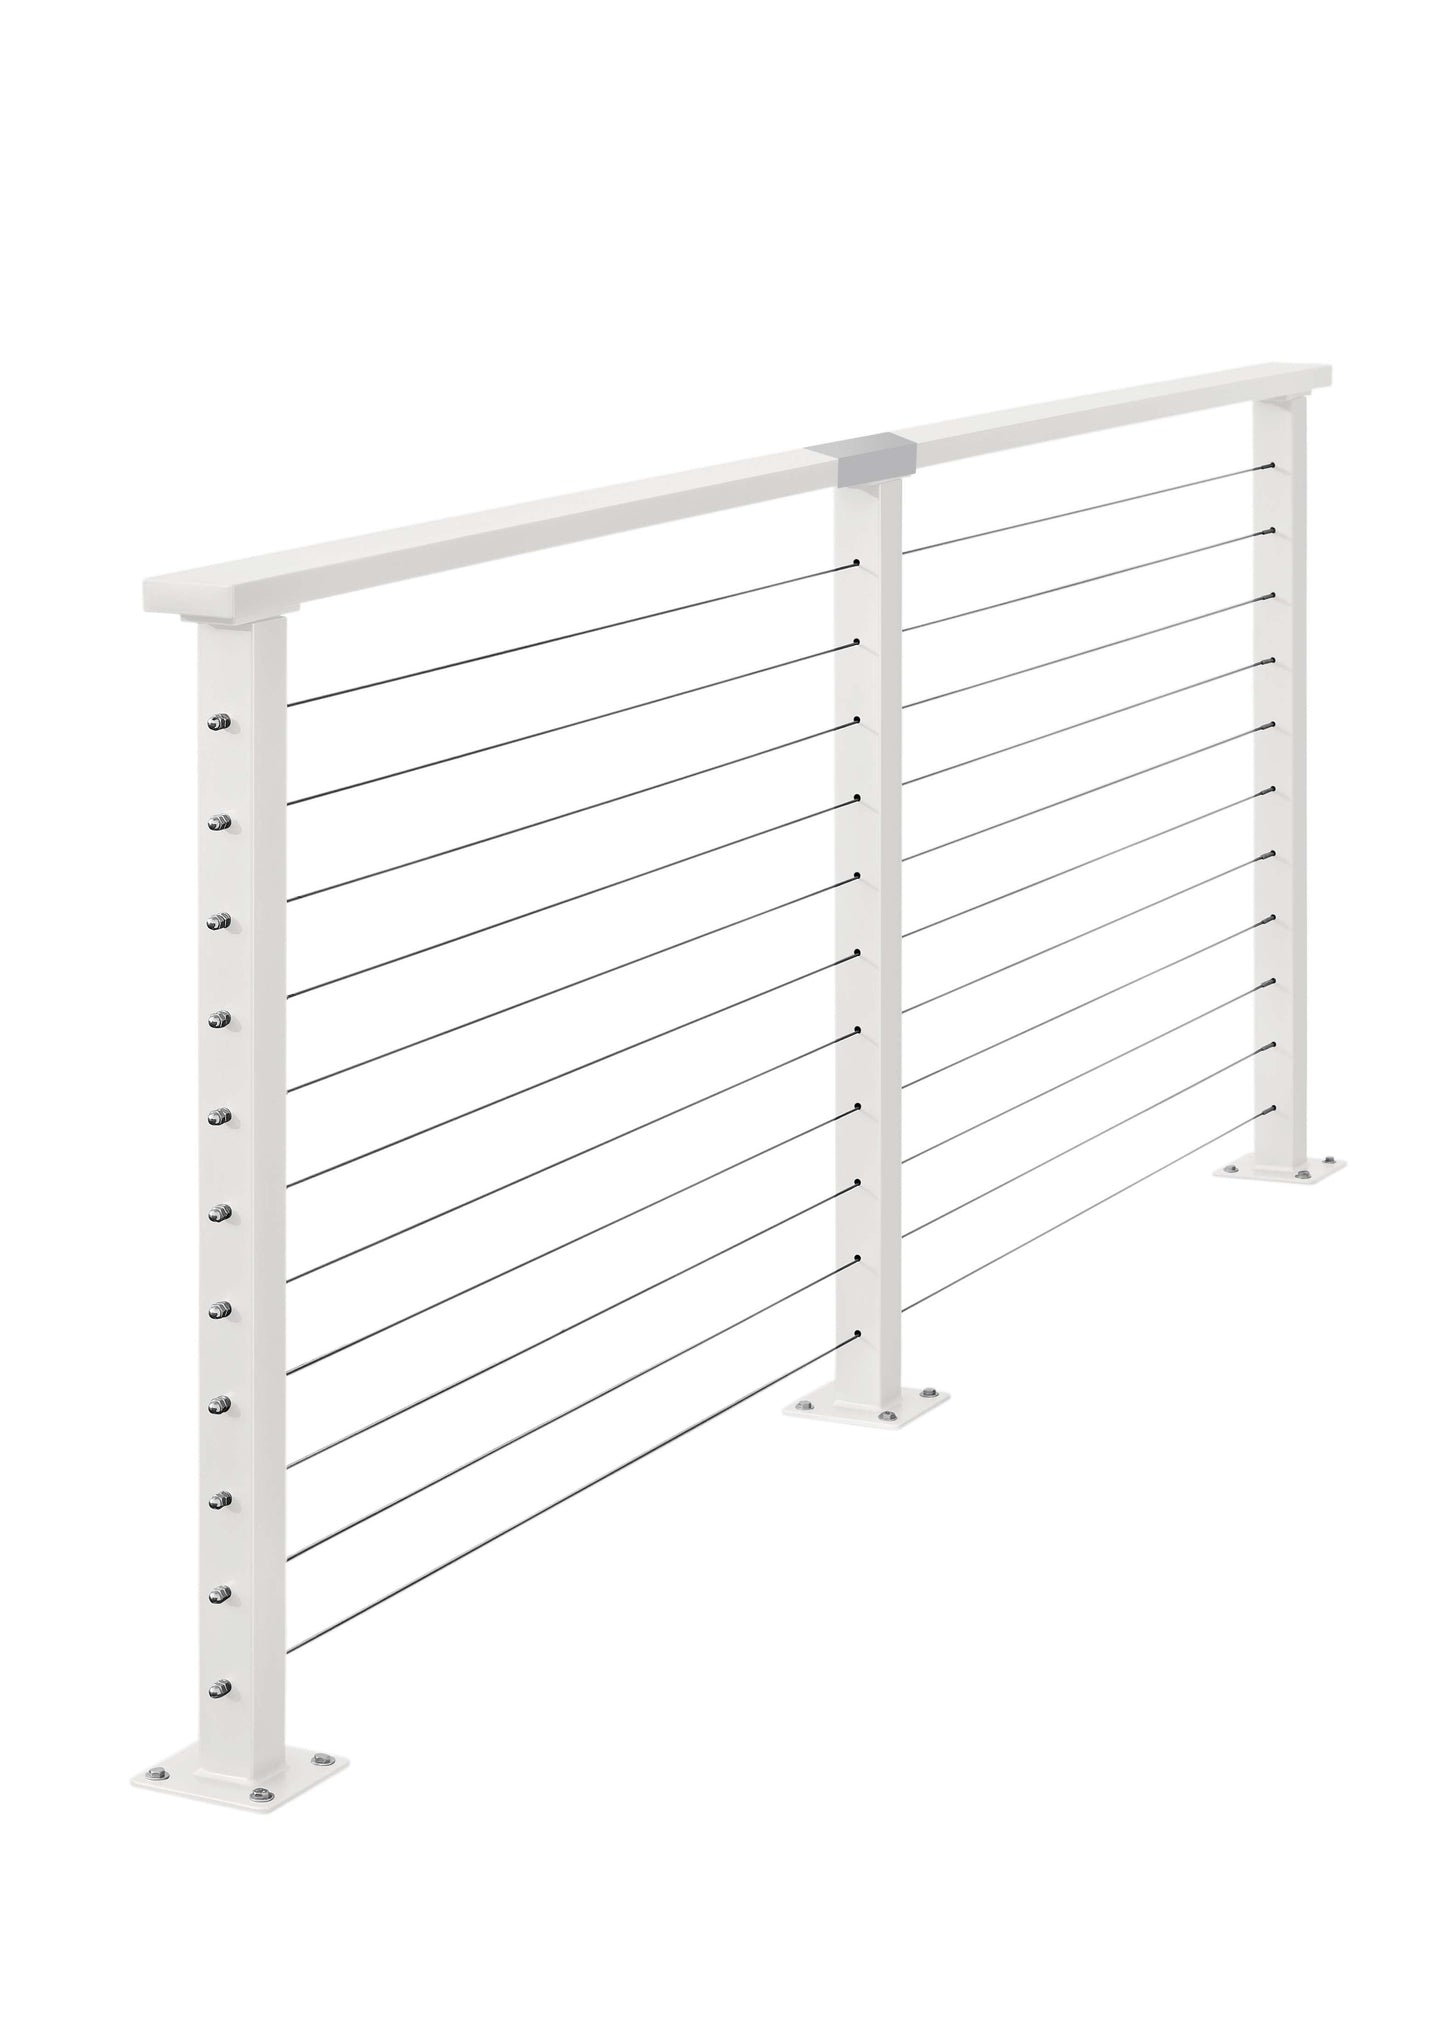 12 ft. White Deck Cable Railing , Stainless